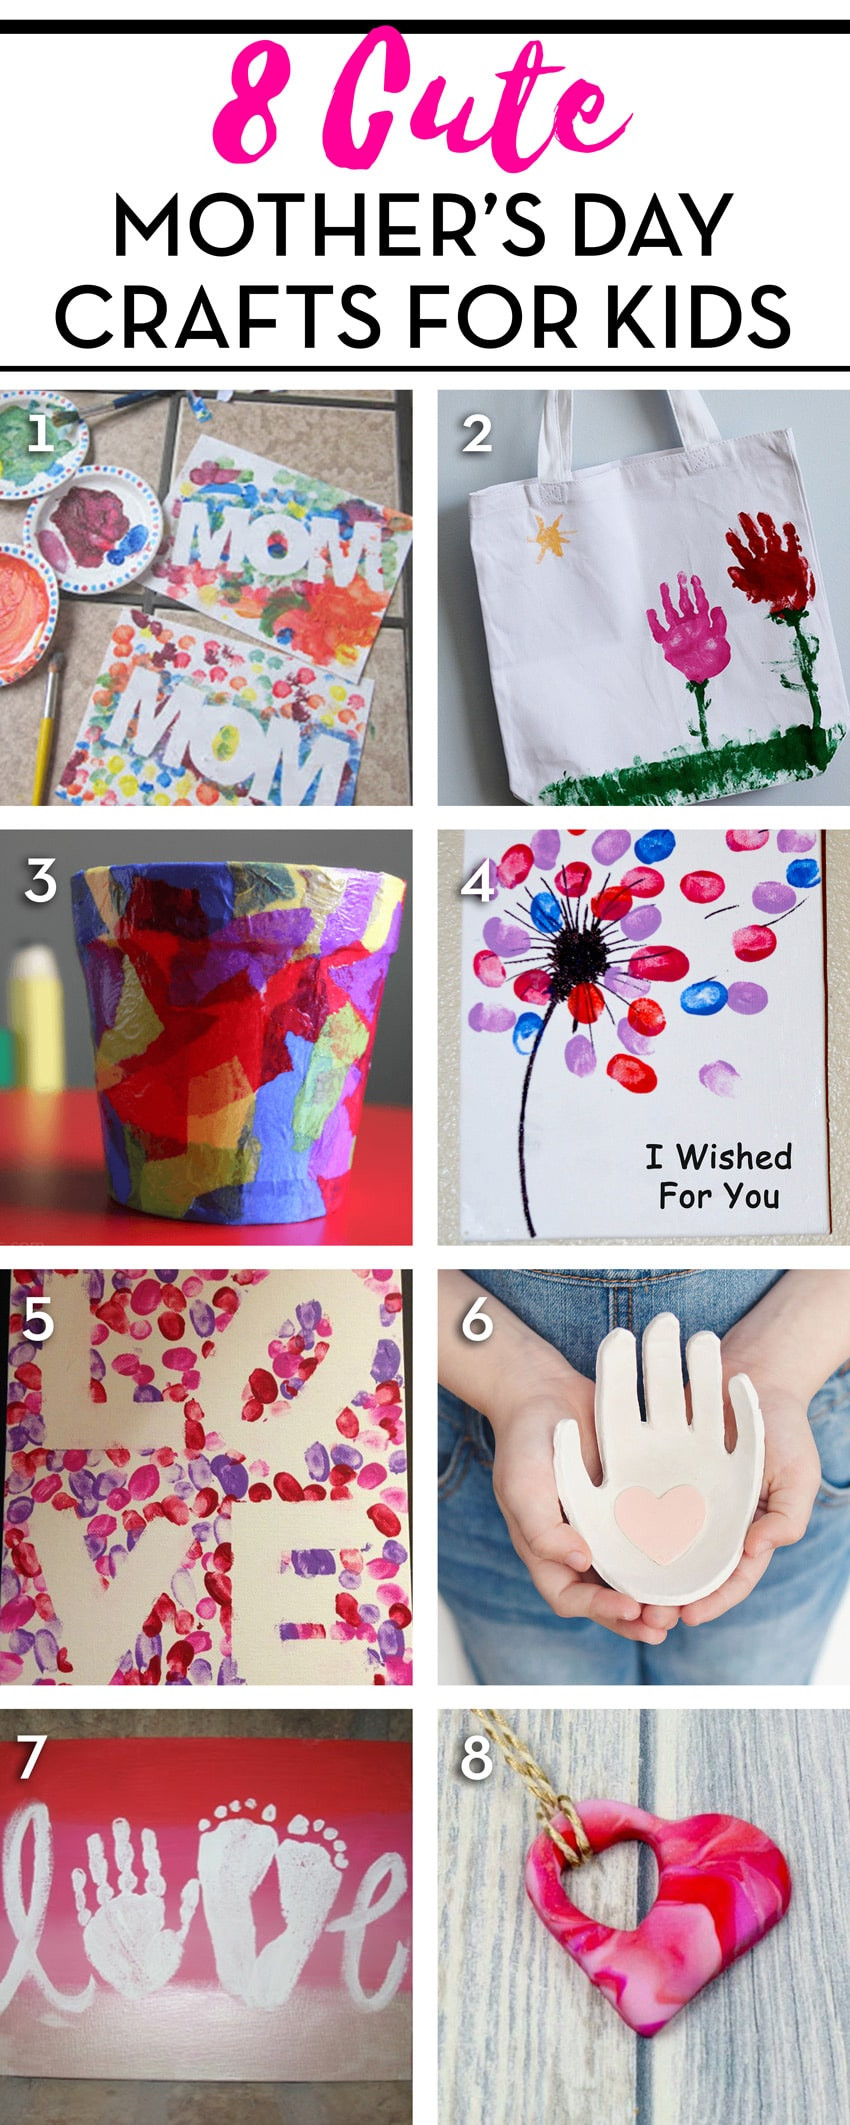 Reddit Mother'S Day Gift Ideas
 Here are 8 Cute Mother s Day Crafts on Pinterest